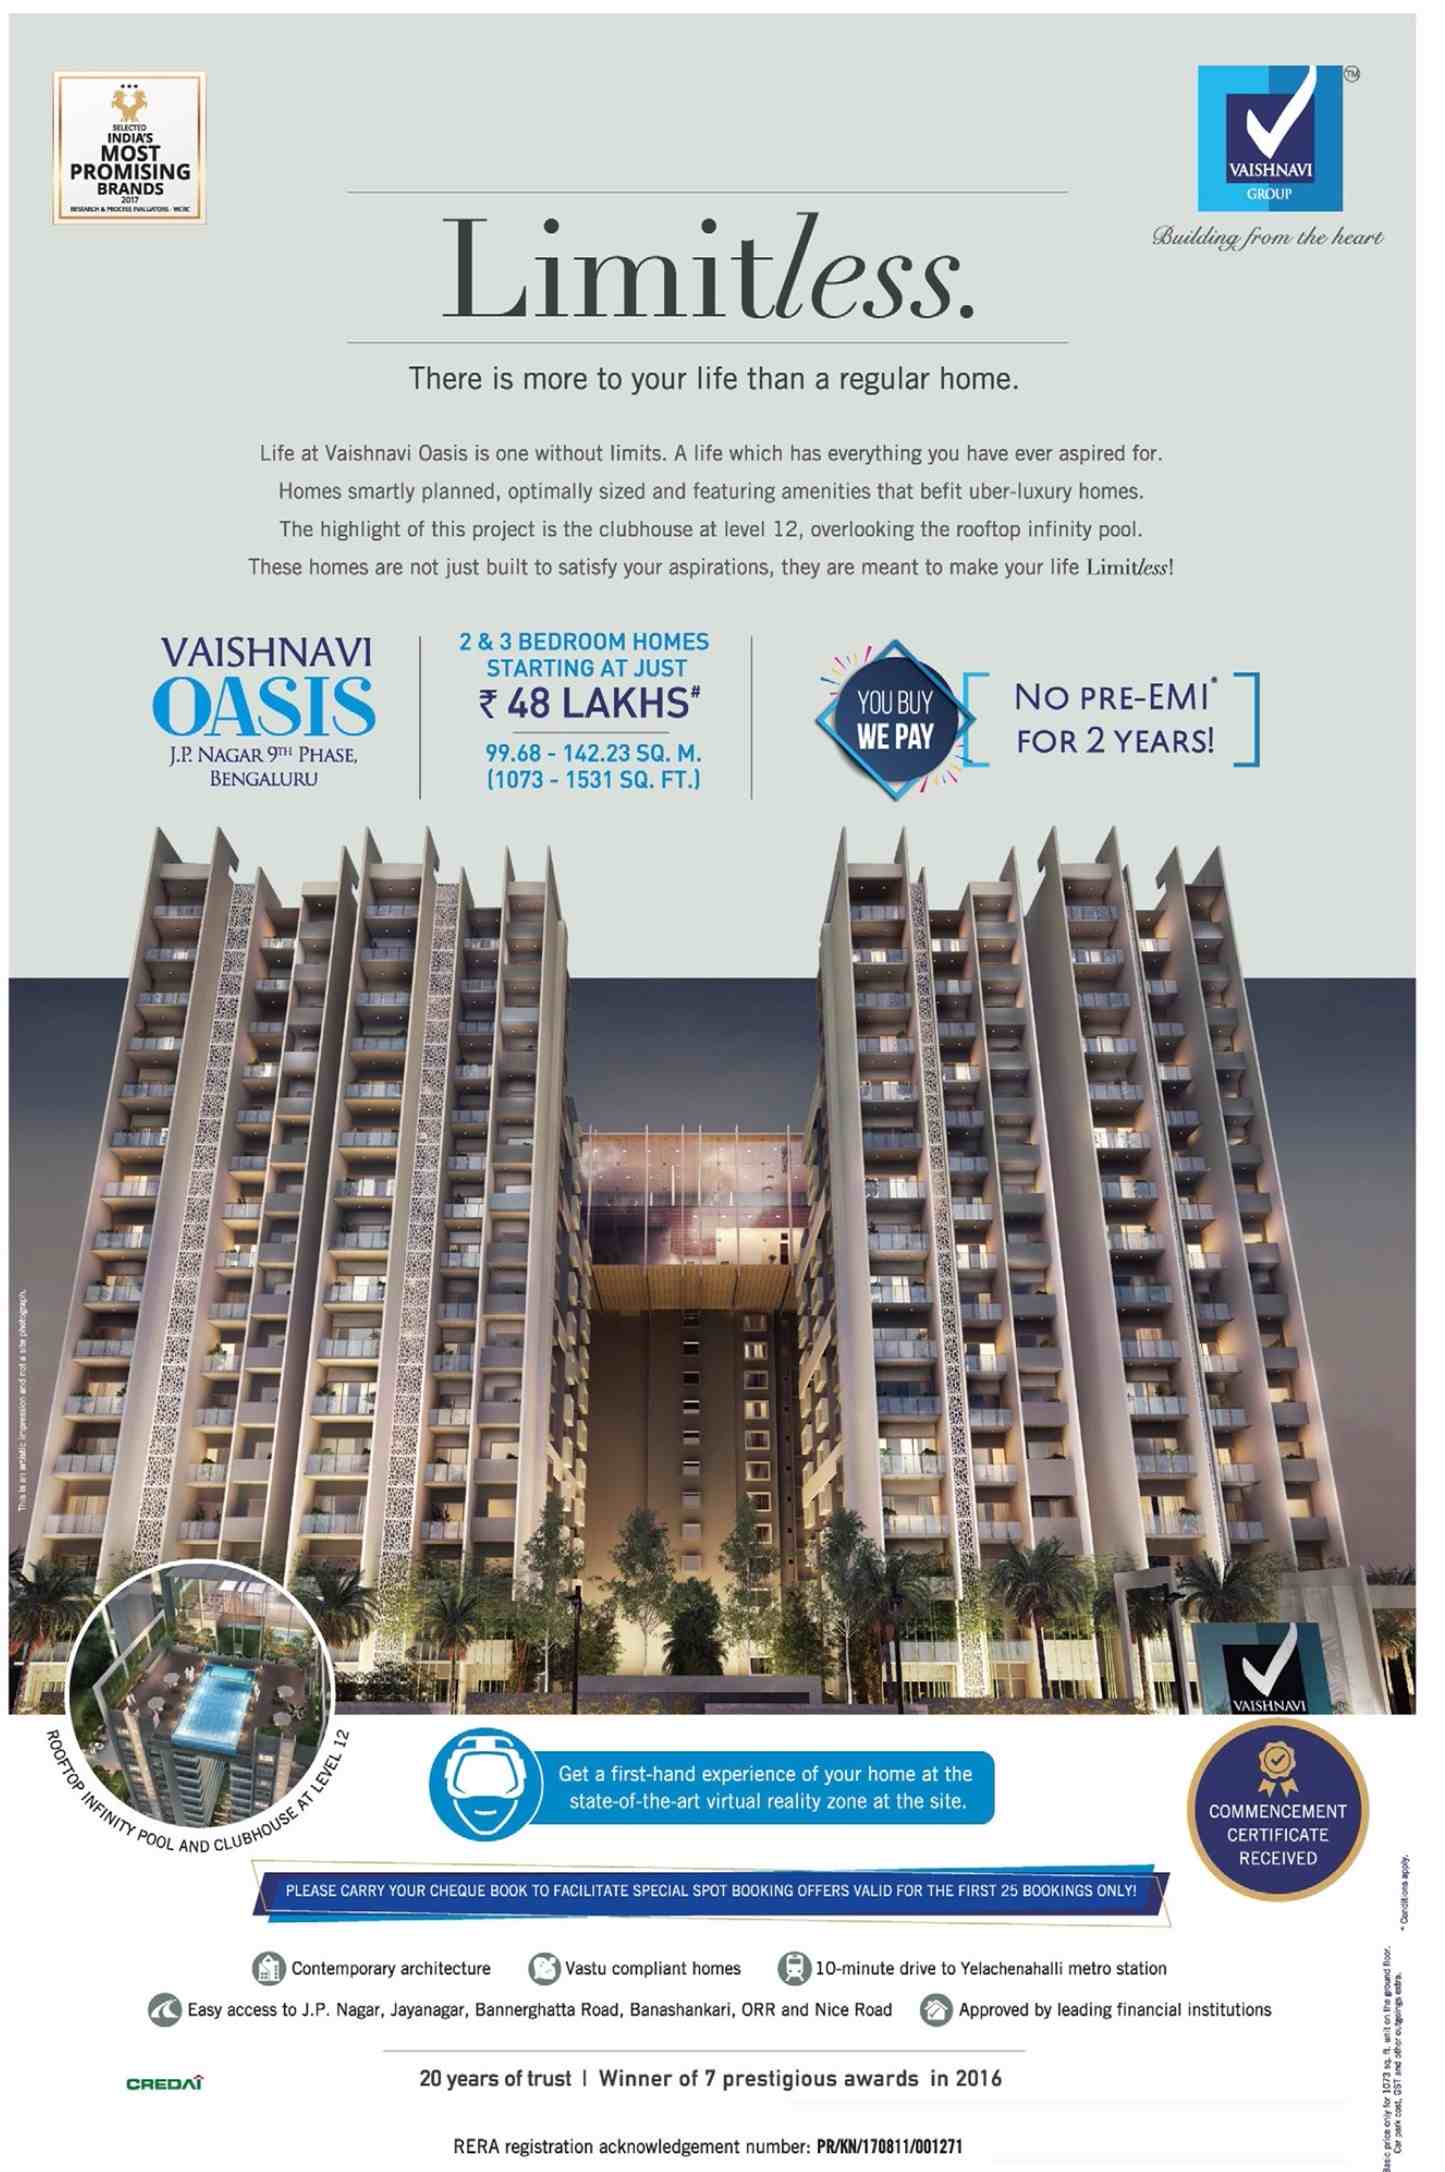 Live a life without limit at Vaishnavi Oasis in Bangalore Update